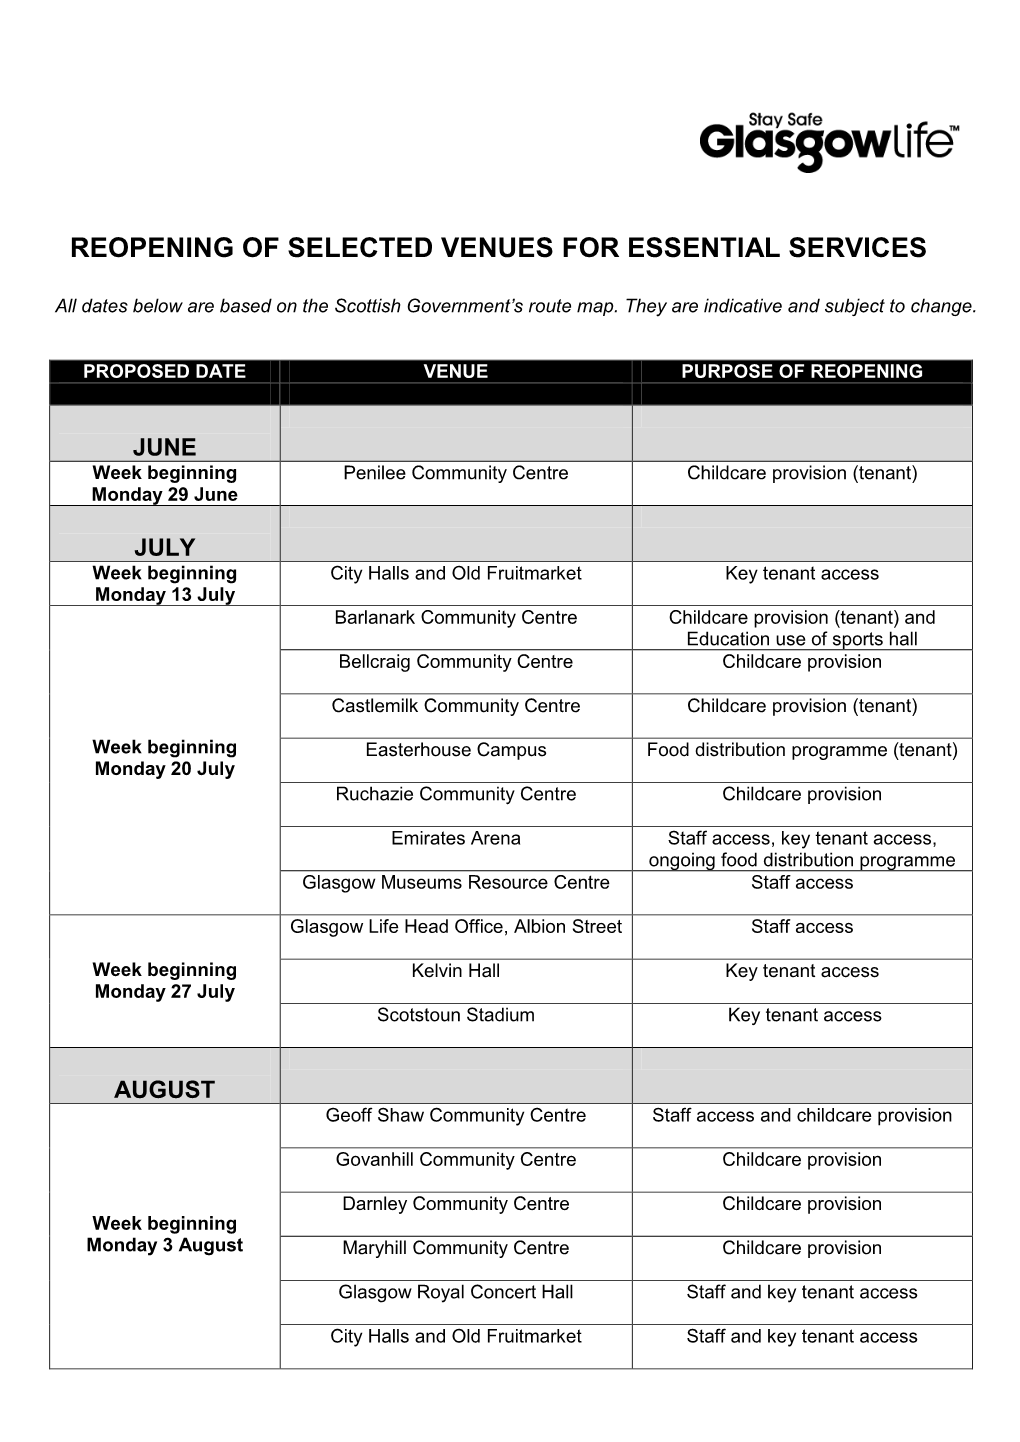 Venues That Are Reopening for Essential Services